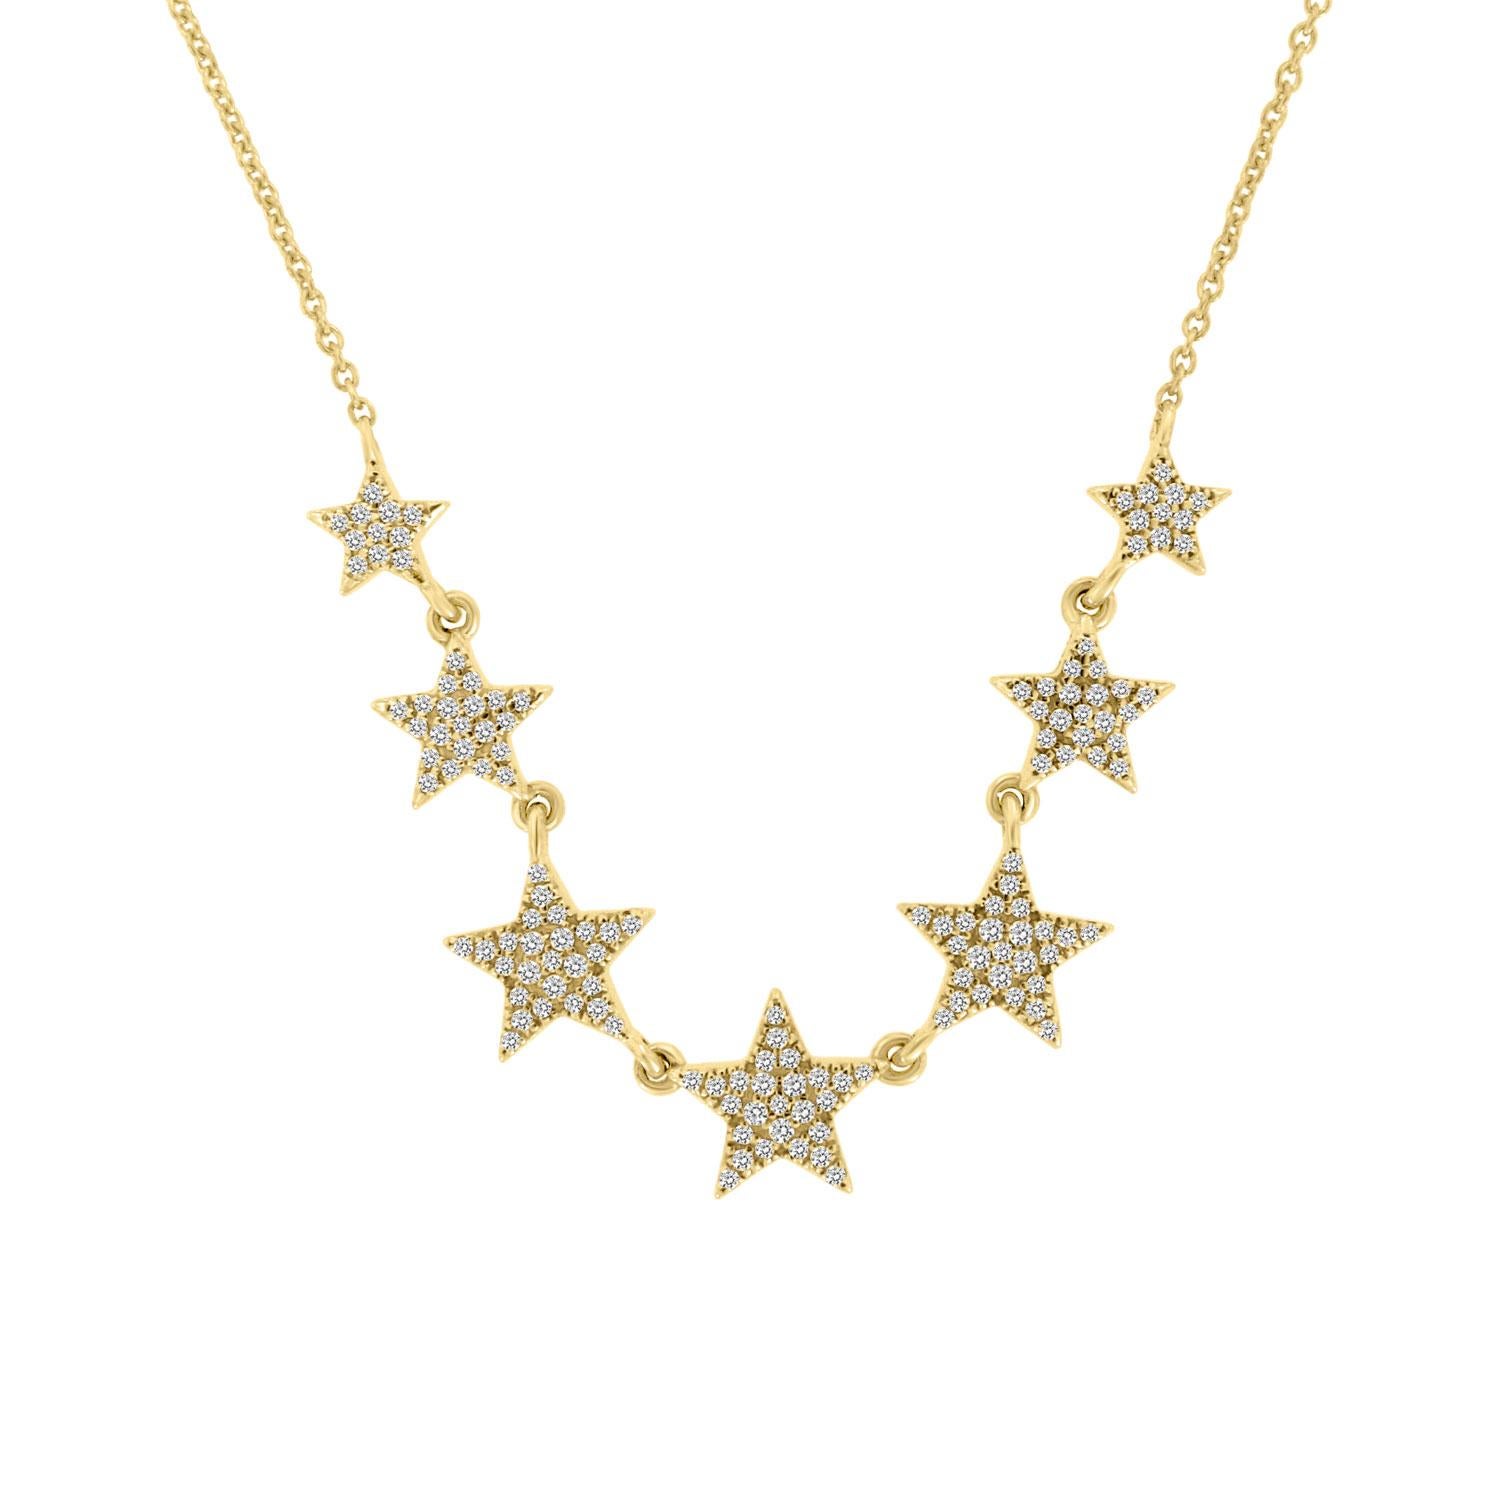 This elegant necklace features 7 diamond stars Micro Prong-set linked to each other via delicate loops. Experience The Difference in Person!

Product details: 

Center Gemstone Type: NATURAL DIAMOND
Center Gemstone Shape: ROUND
Metal: 18K Yellow